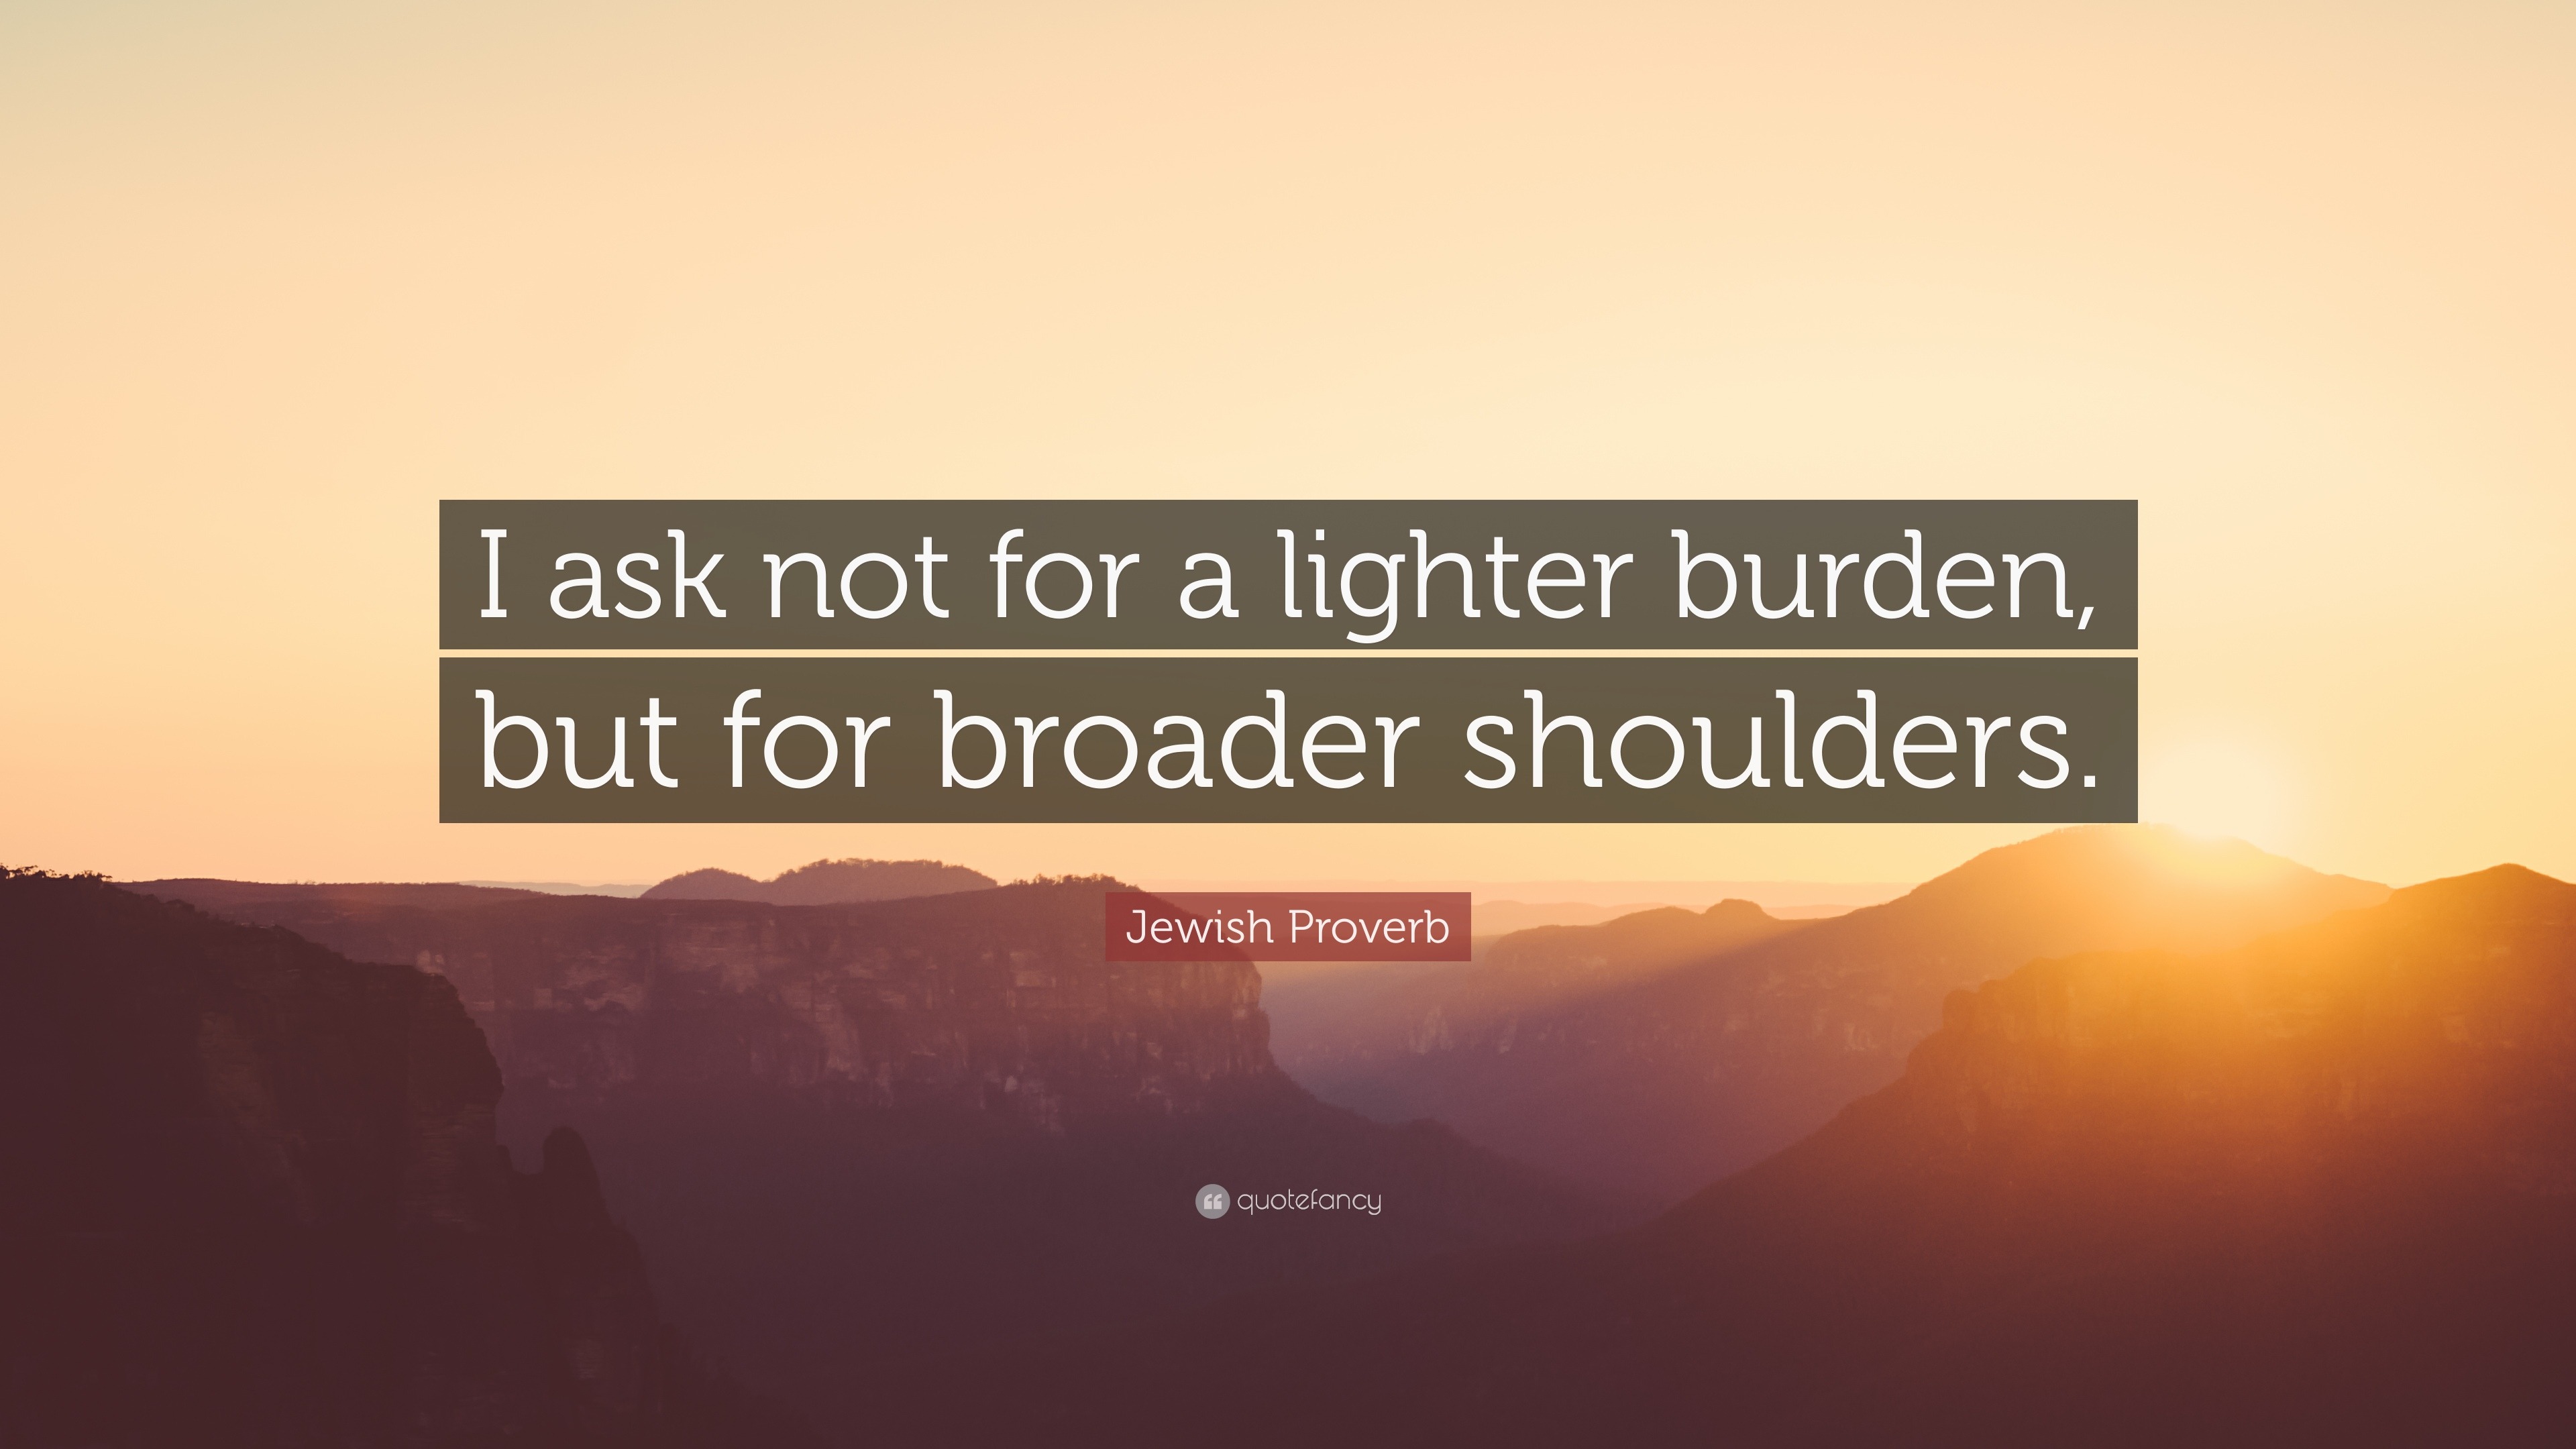 Jewish Proverb Quote: “I ask not for a lighter burden, but for broader